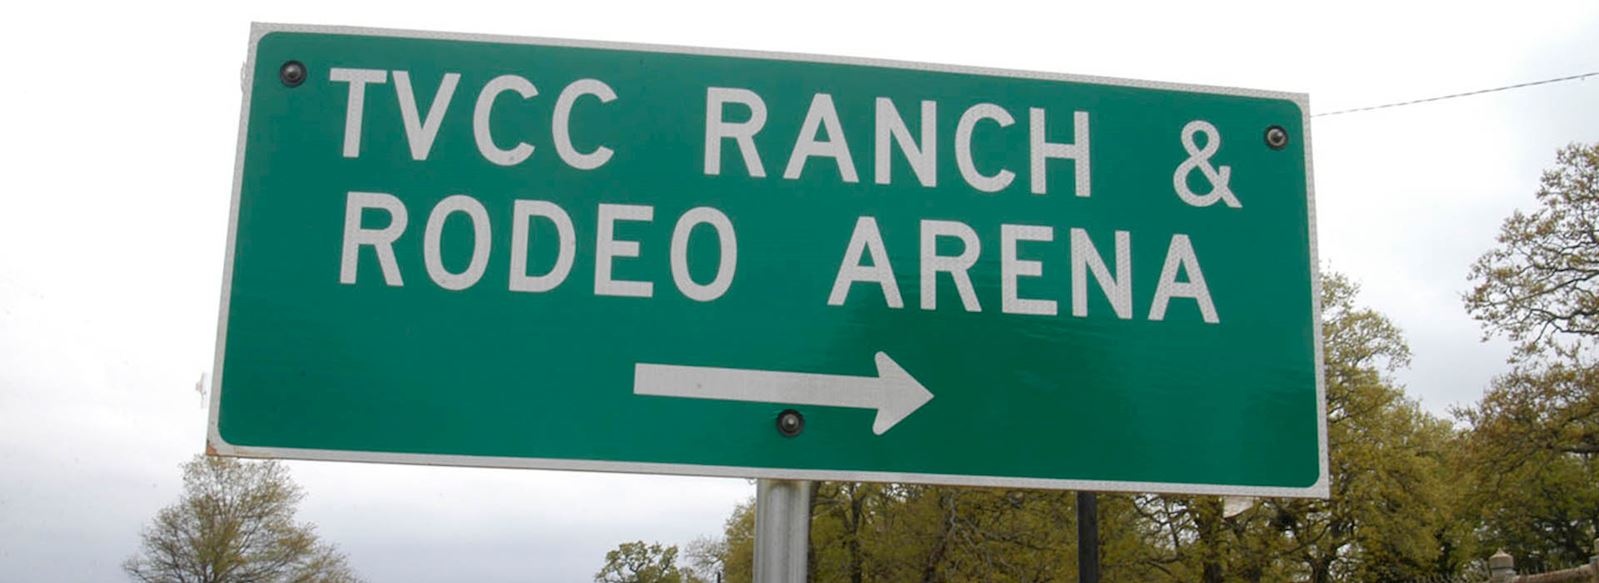 Highway sign - TVCC Ranch & Rodeo Arena